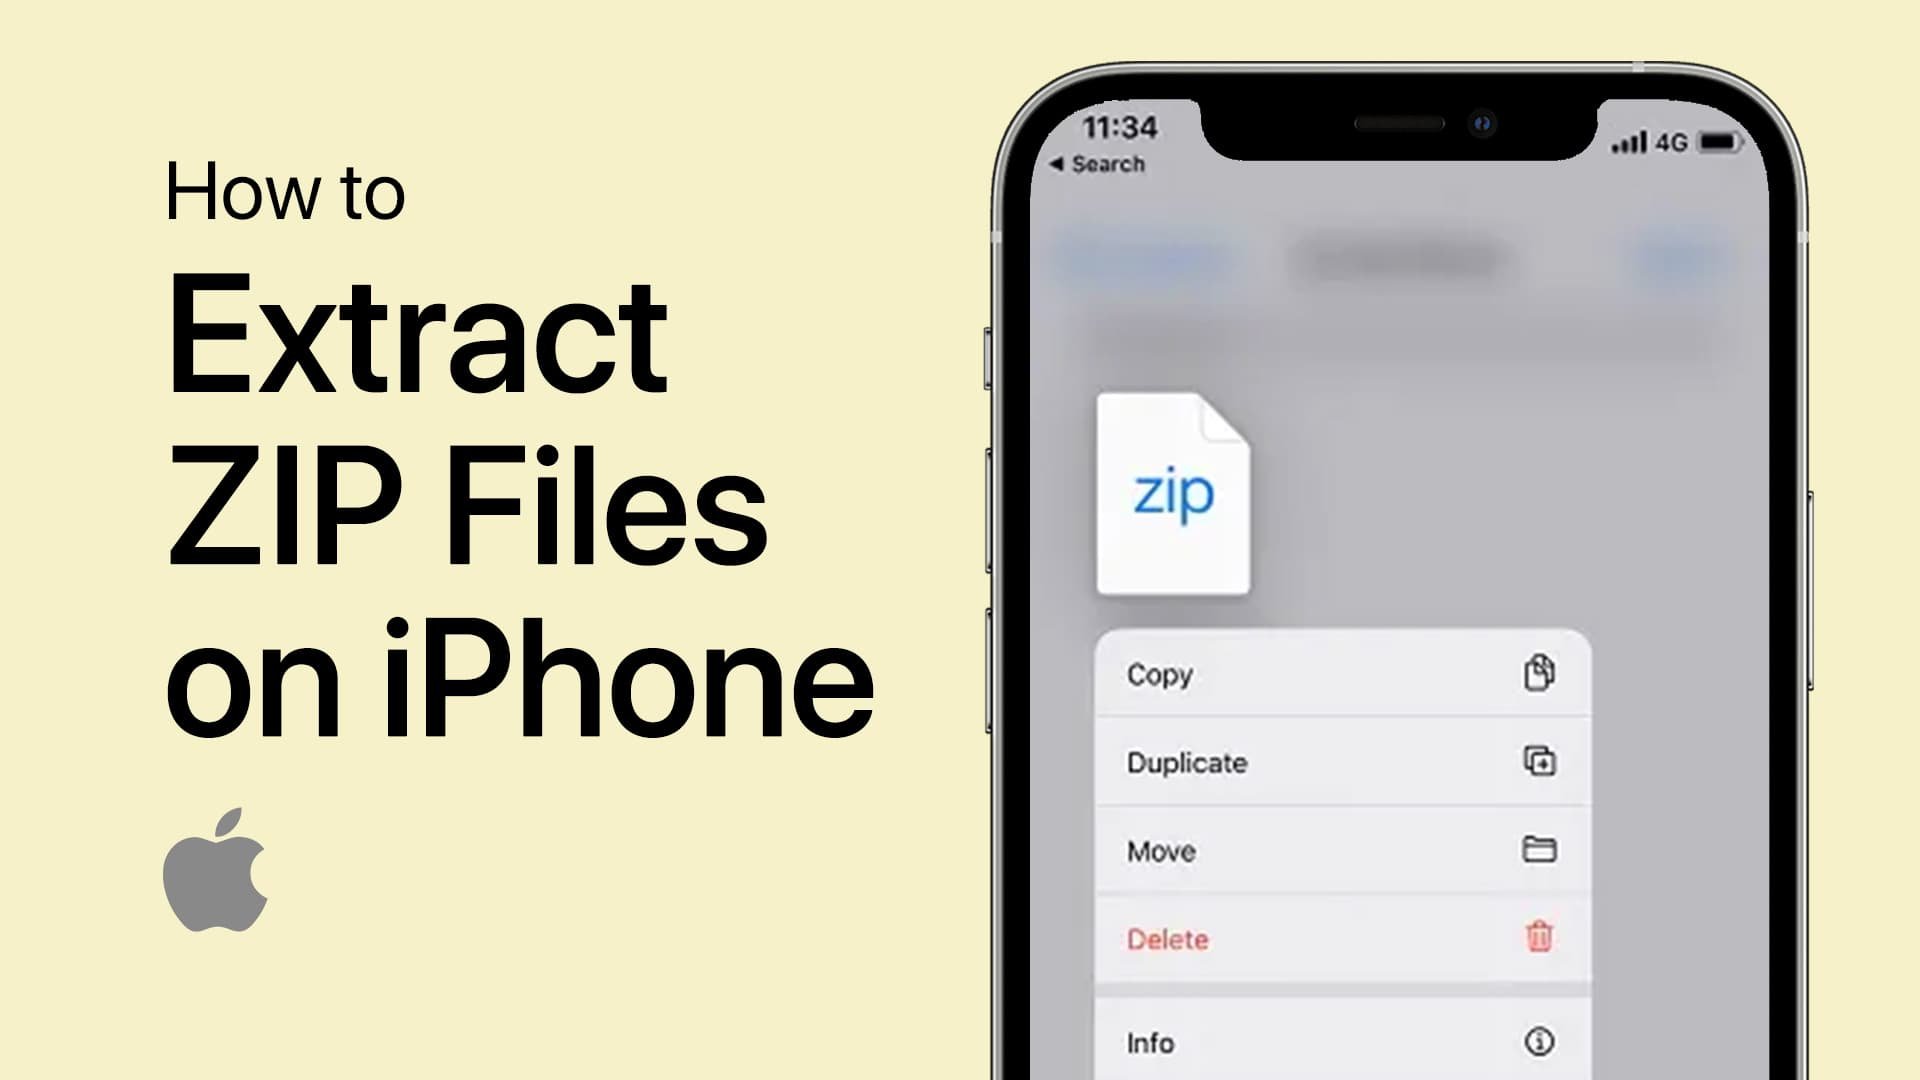 How To Extract ZIP Files on iPhone